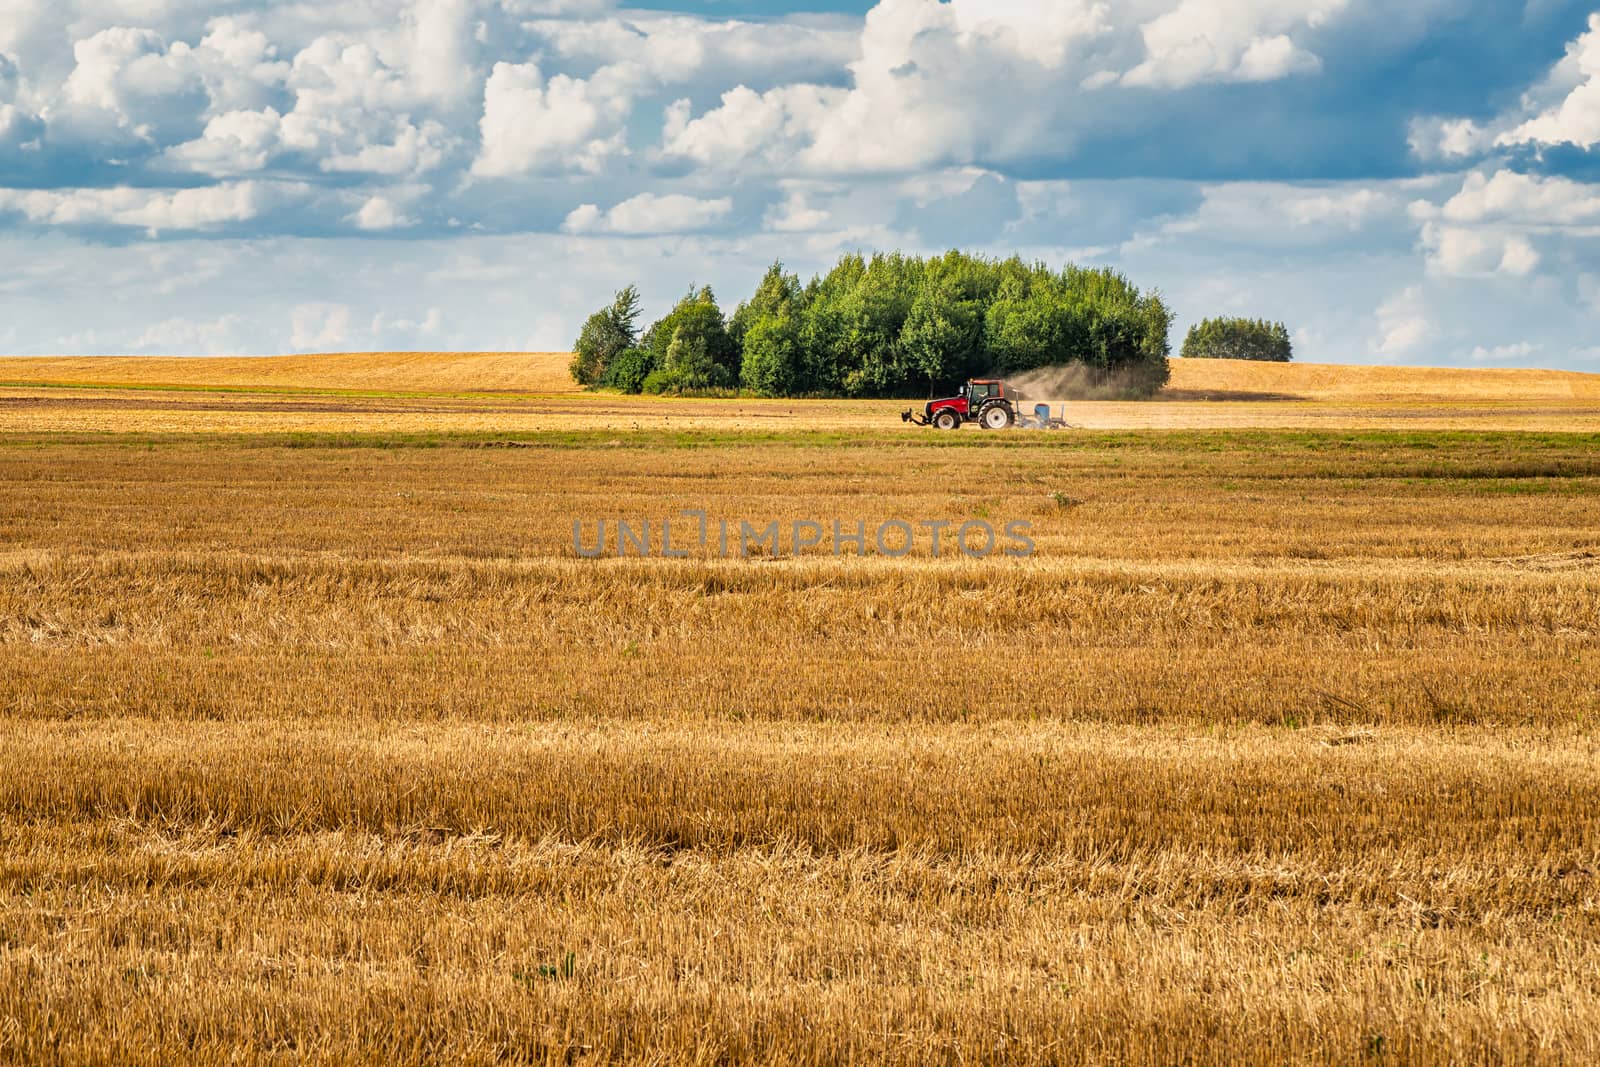 Cultivated Land in The Countryside with Tractor and Blue Sky Background.